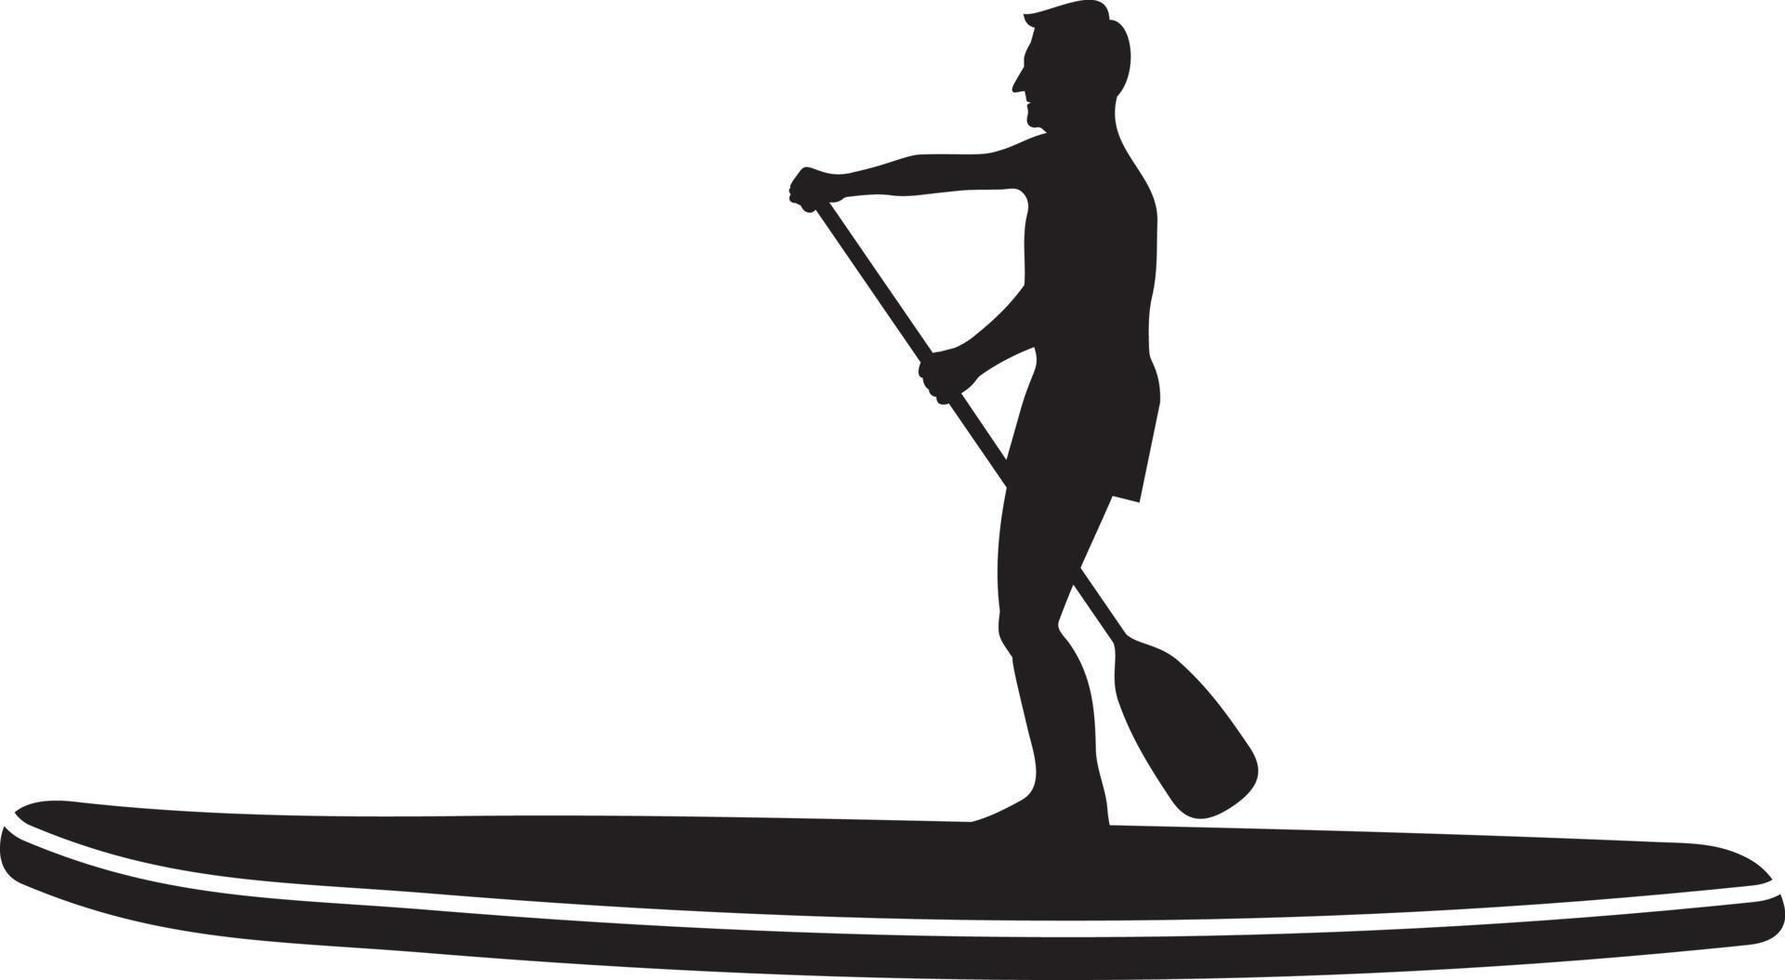 Stand up paddle board silhouette vector